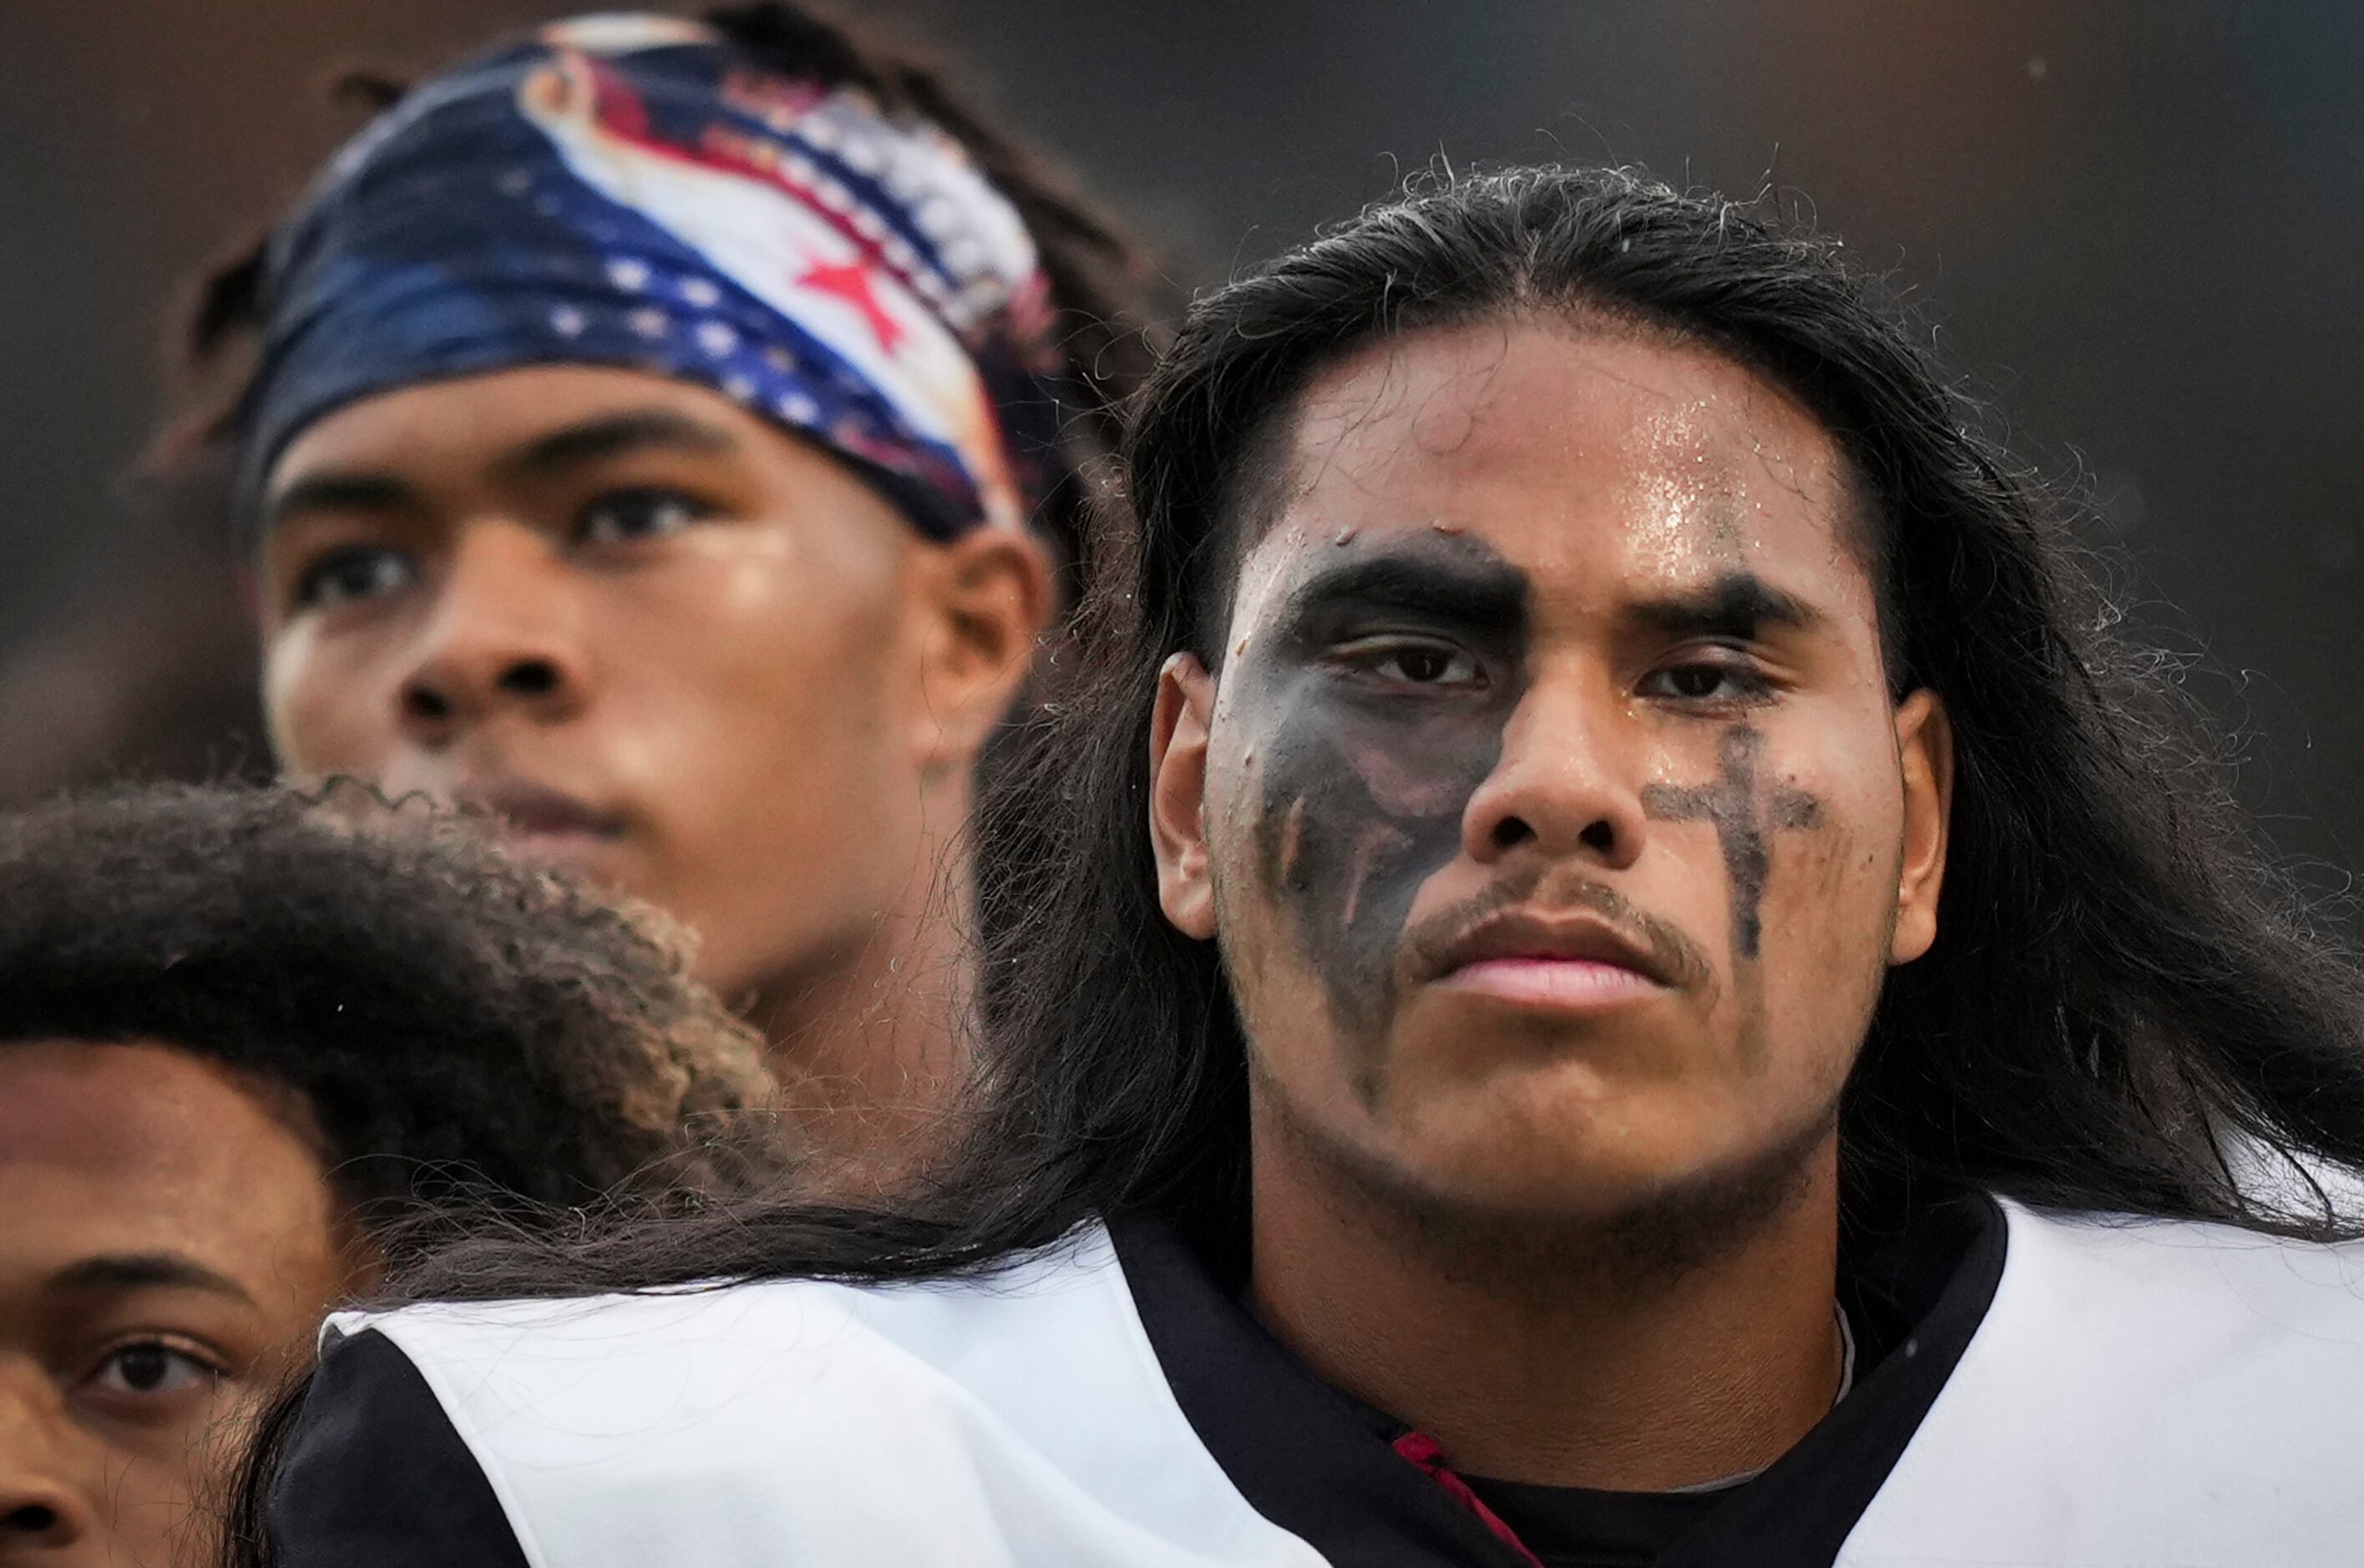 Euless Trinity offensive lineman Sio Lea'Aeatoa stands for the national anthem with his team...